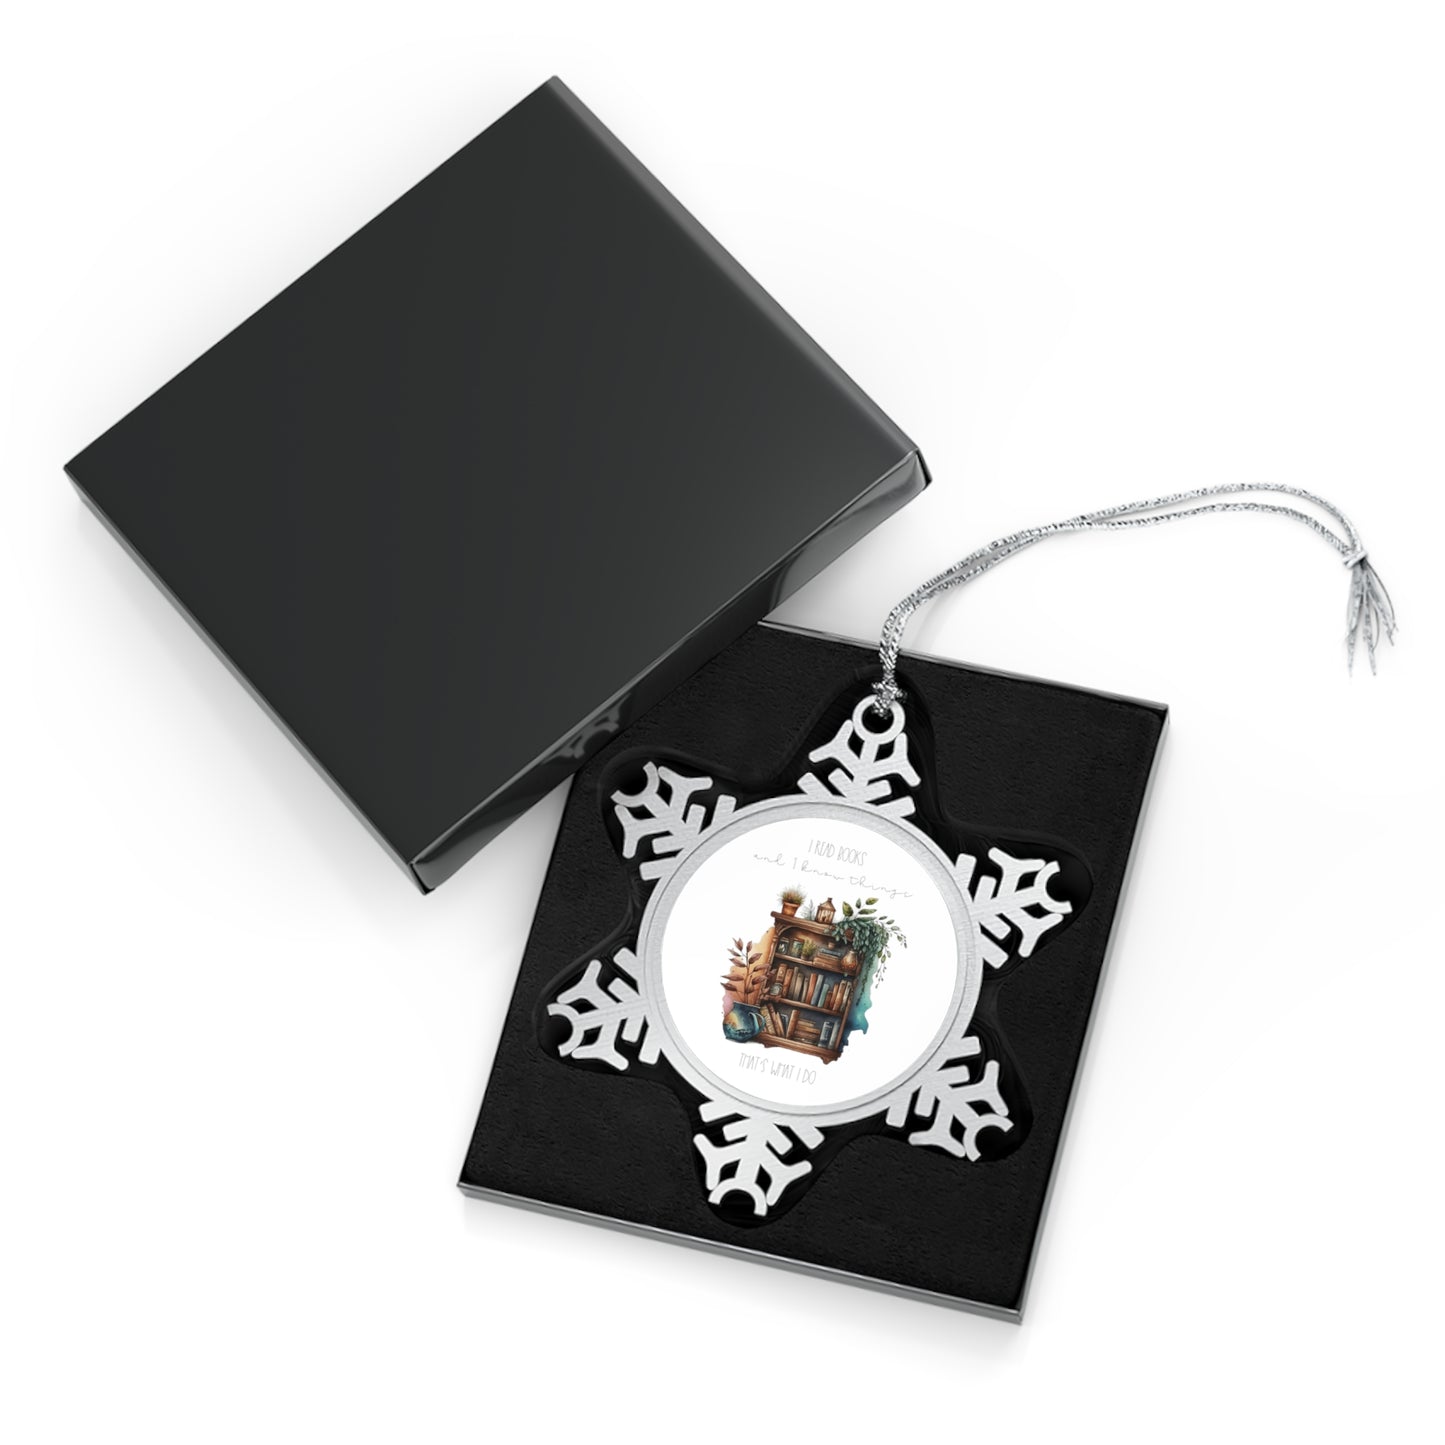 Pewter Snowflake Ornament “I read books and I know things. That’s what I do.”